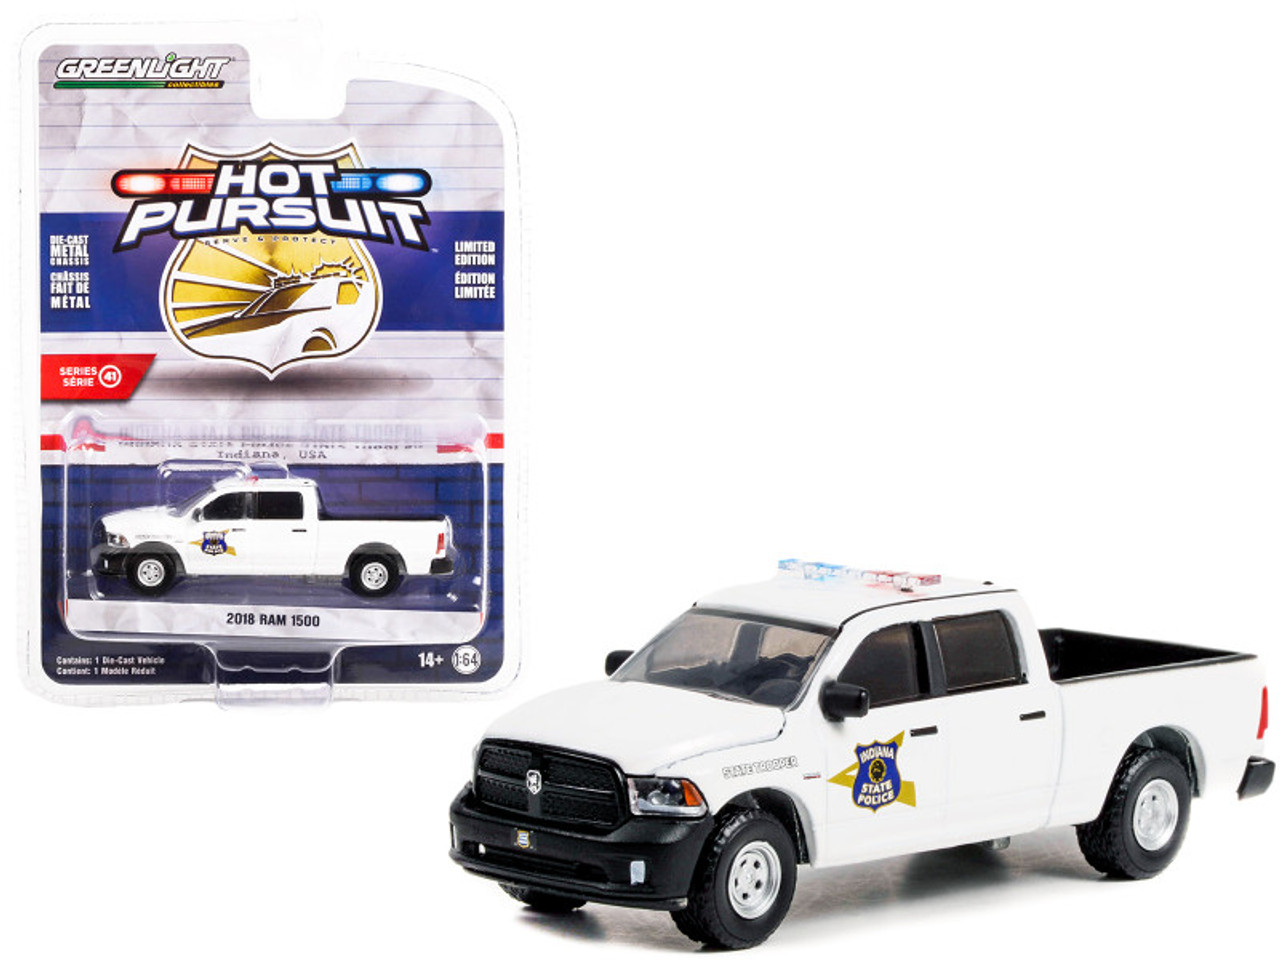 2018 Dodge Ram 1500 Pickup Truck Police White "Indiana State Police State Trooper" "Hot Pursuit" Series 41 1/64 Diecast Model Car by Greenlight